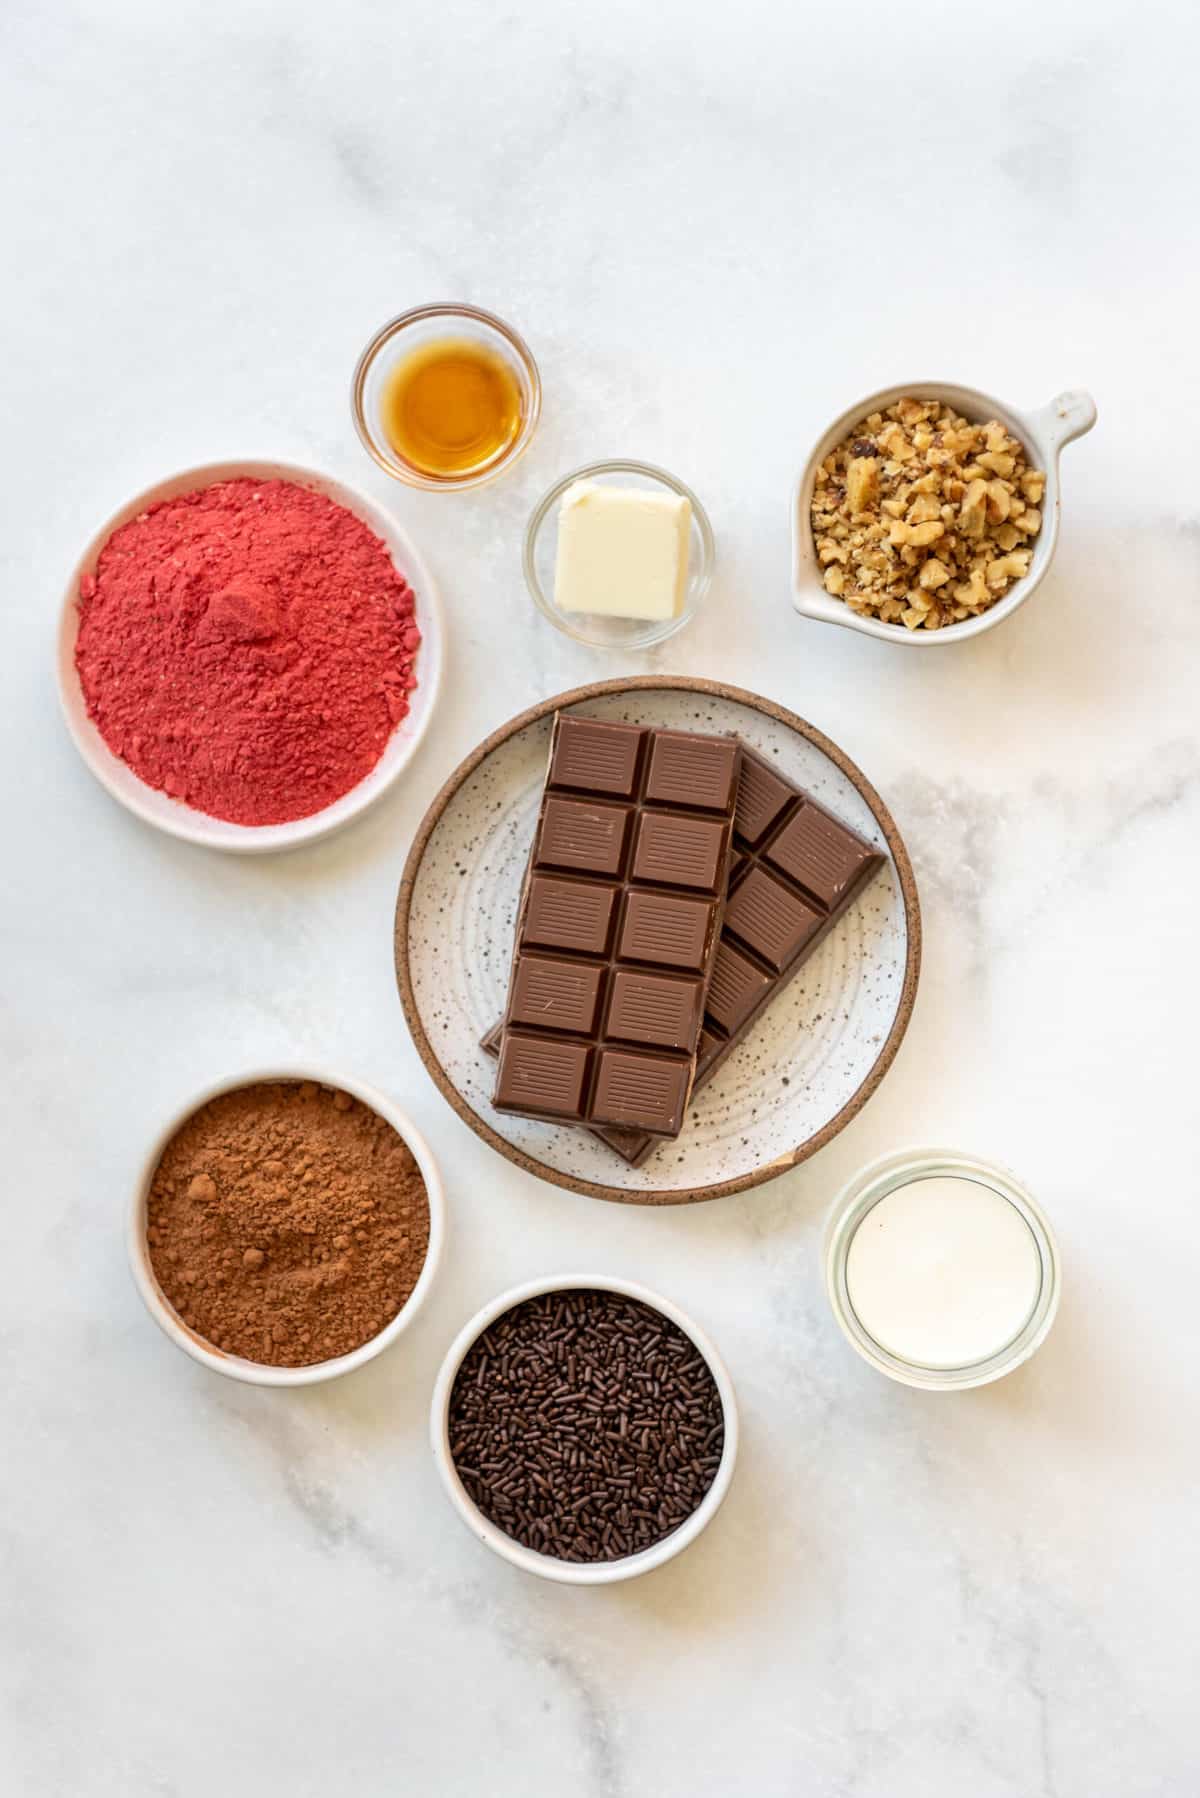 Ingredients for chocolate truffles on a white surface.